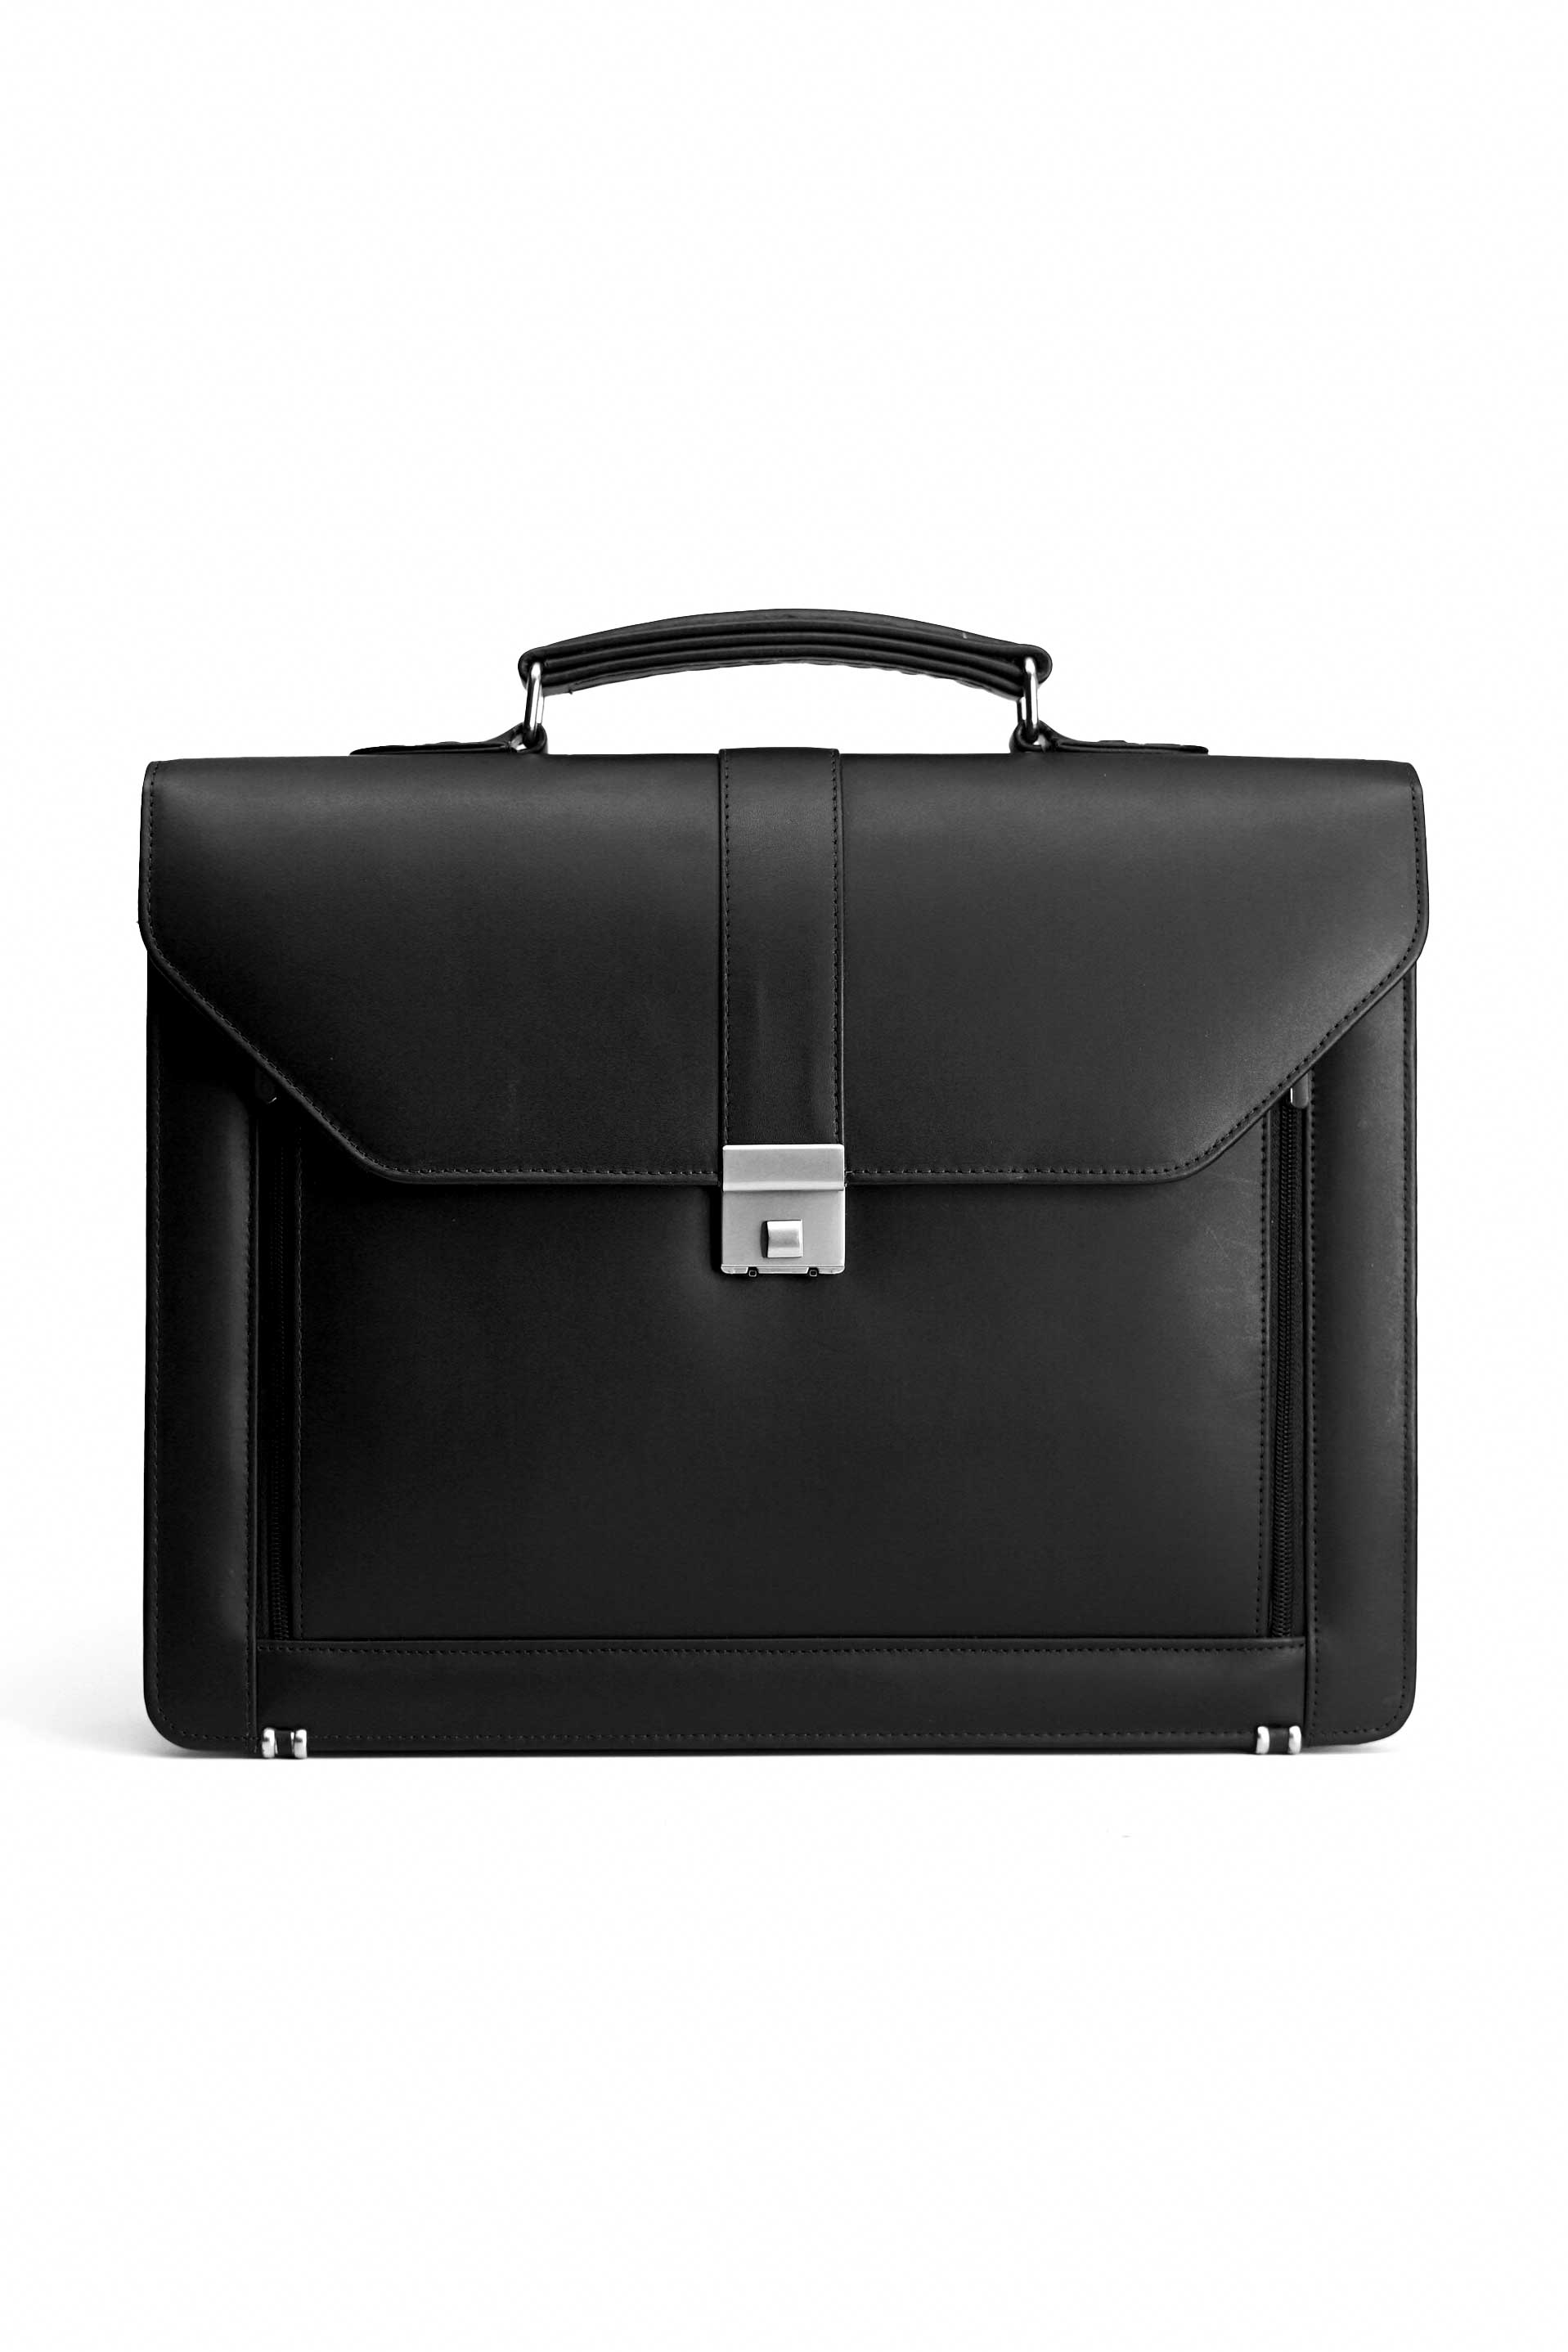 The Executive Leather Briefcase Office Bag With Laptop Compartment